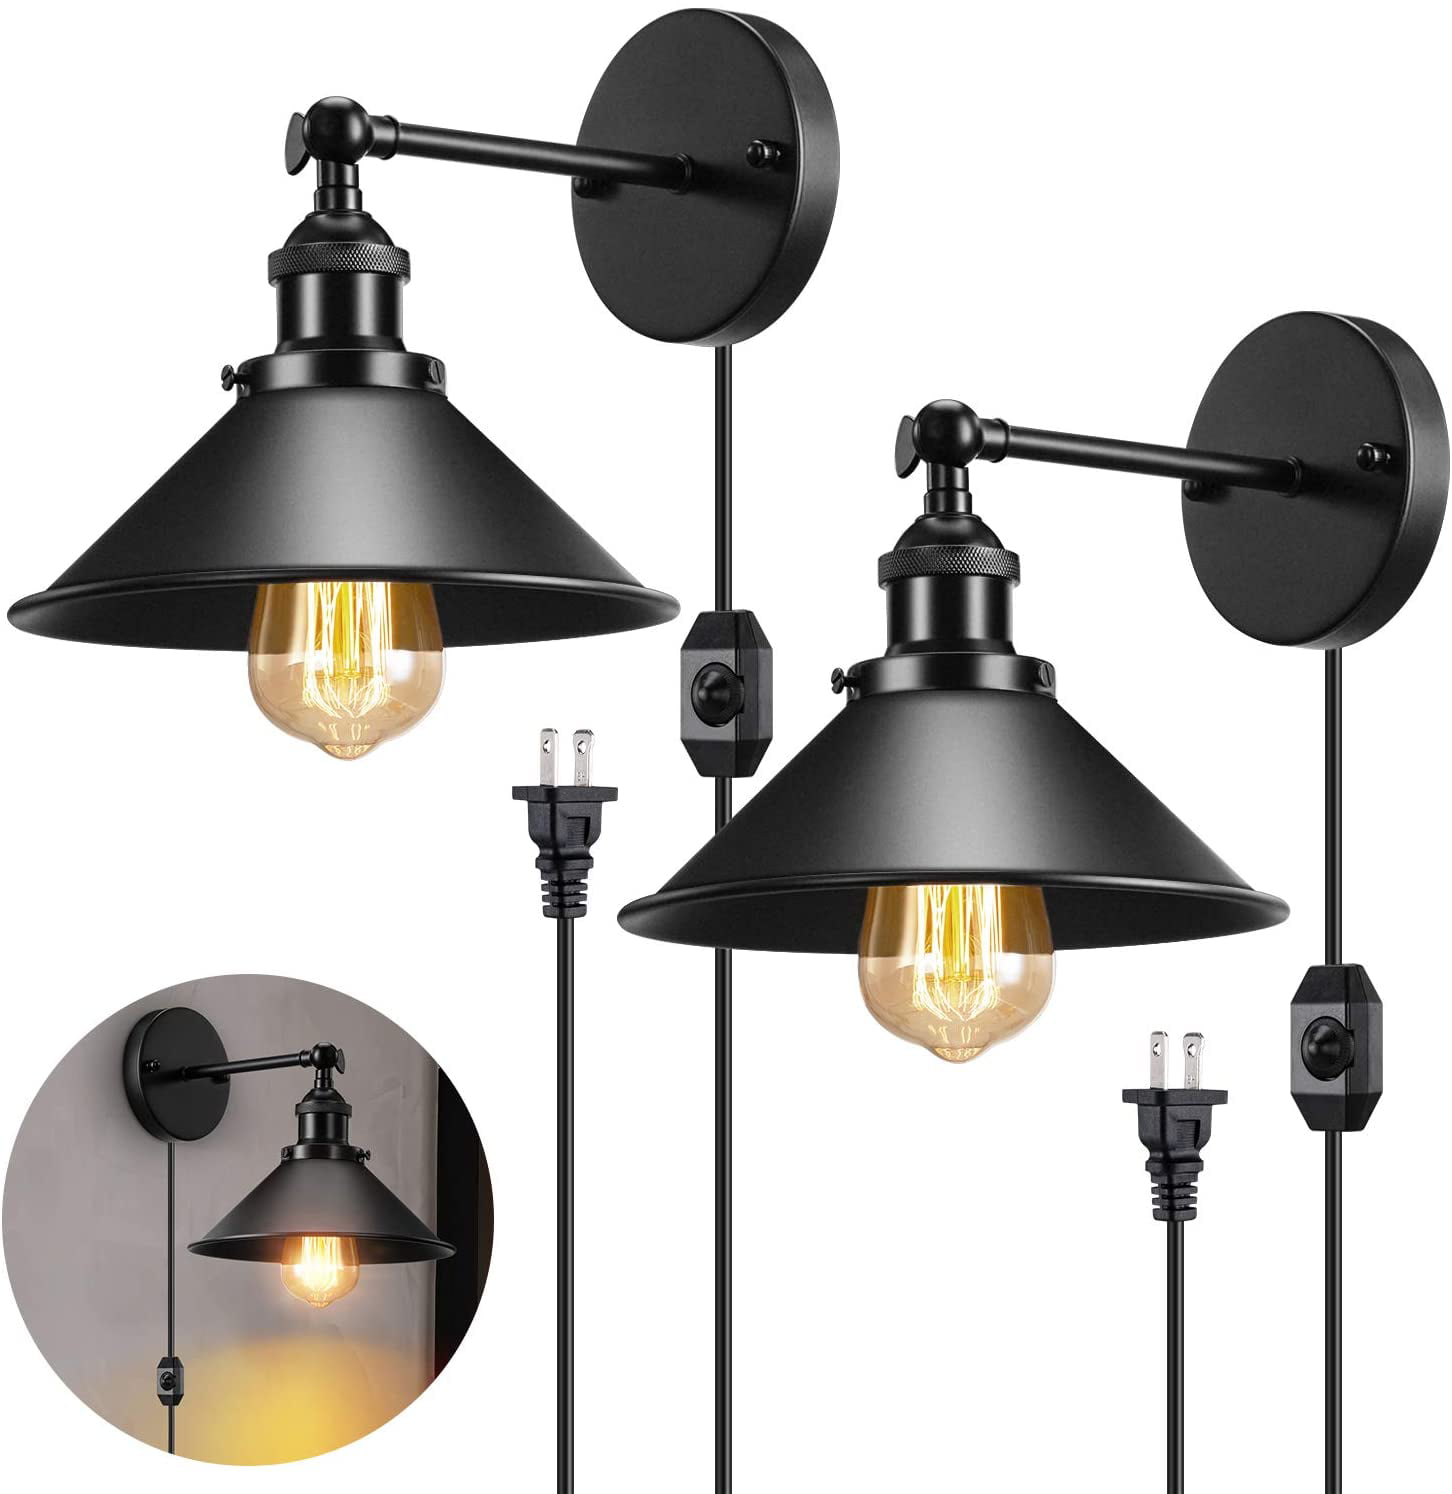 Wall Sconce Plug in Vintage Industrial Dimmable Wall Light Lamp Shade Pack of 2 